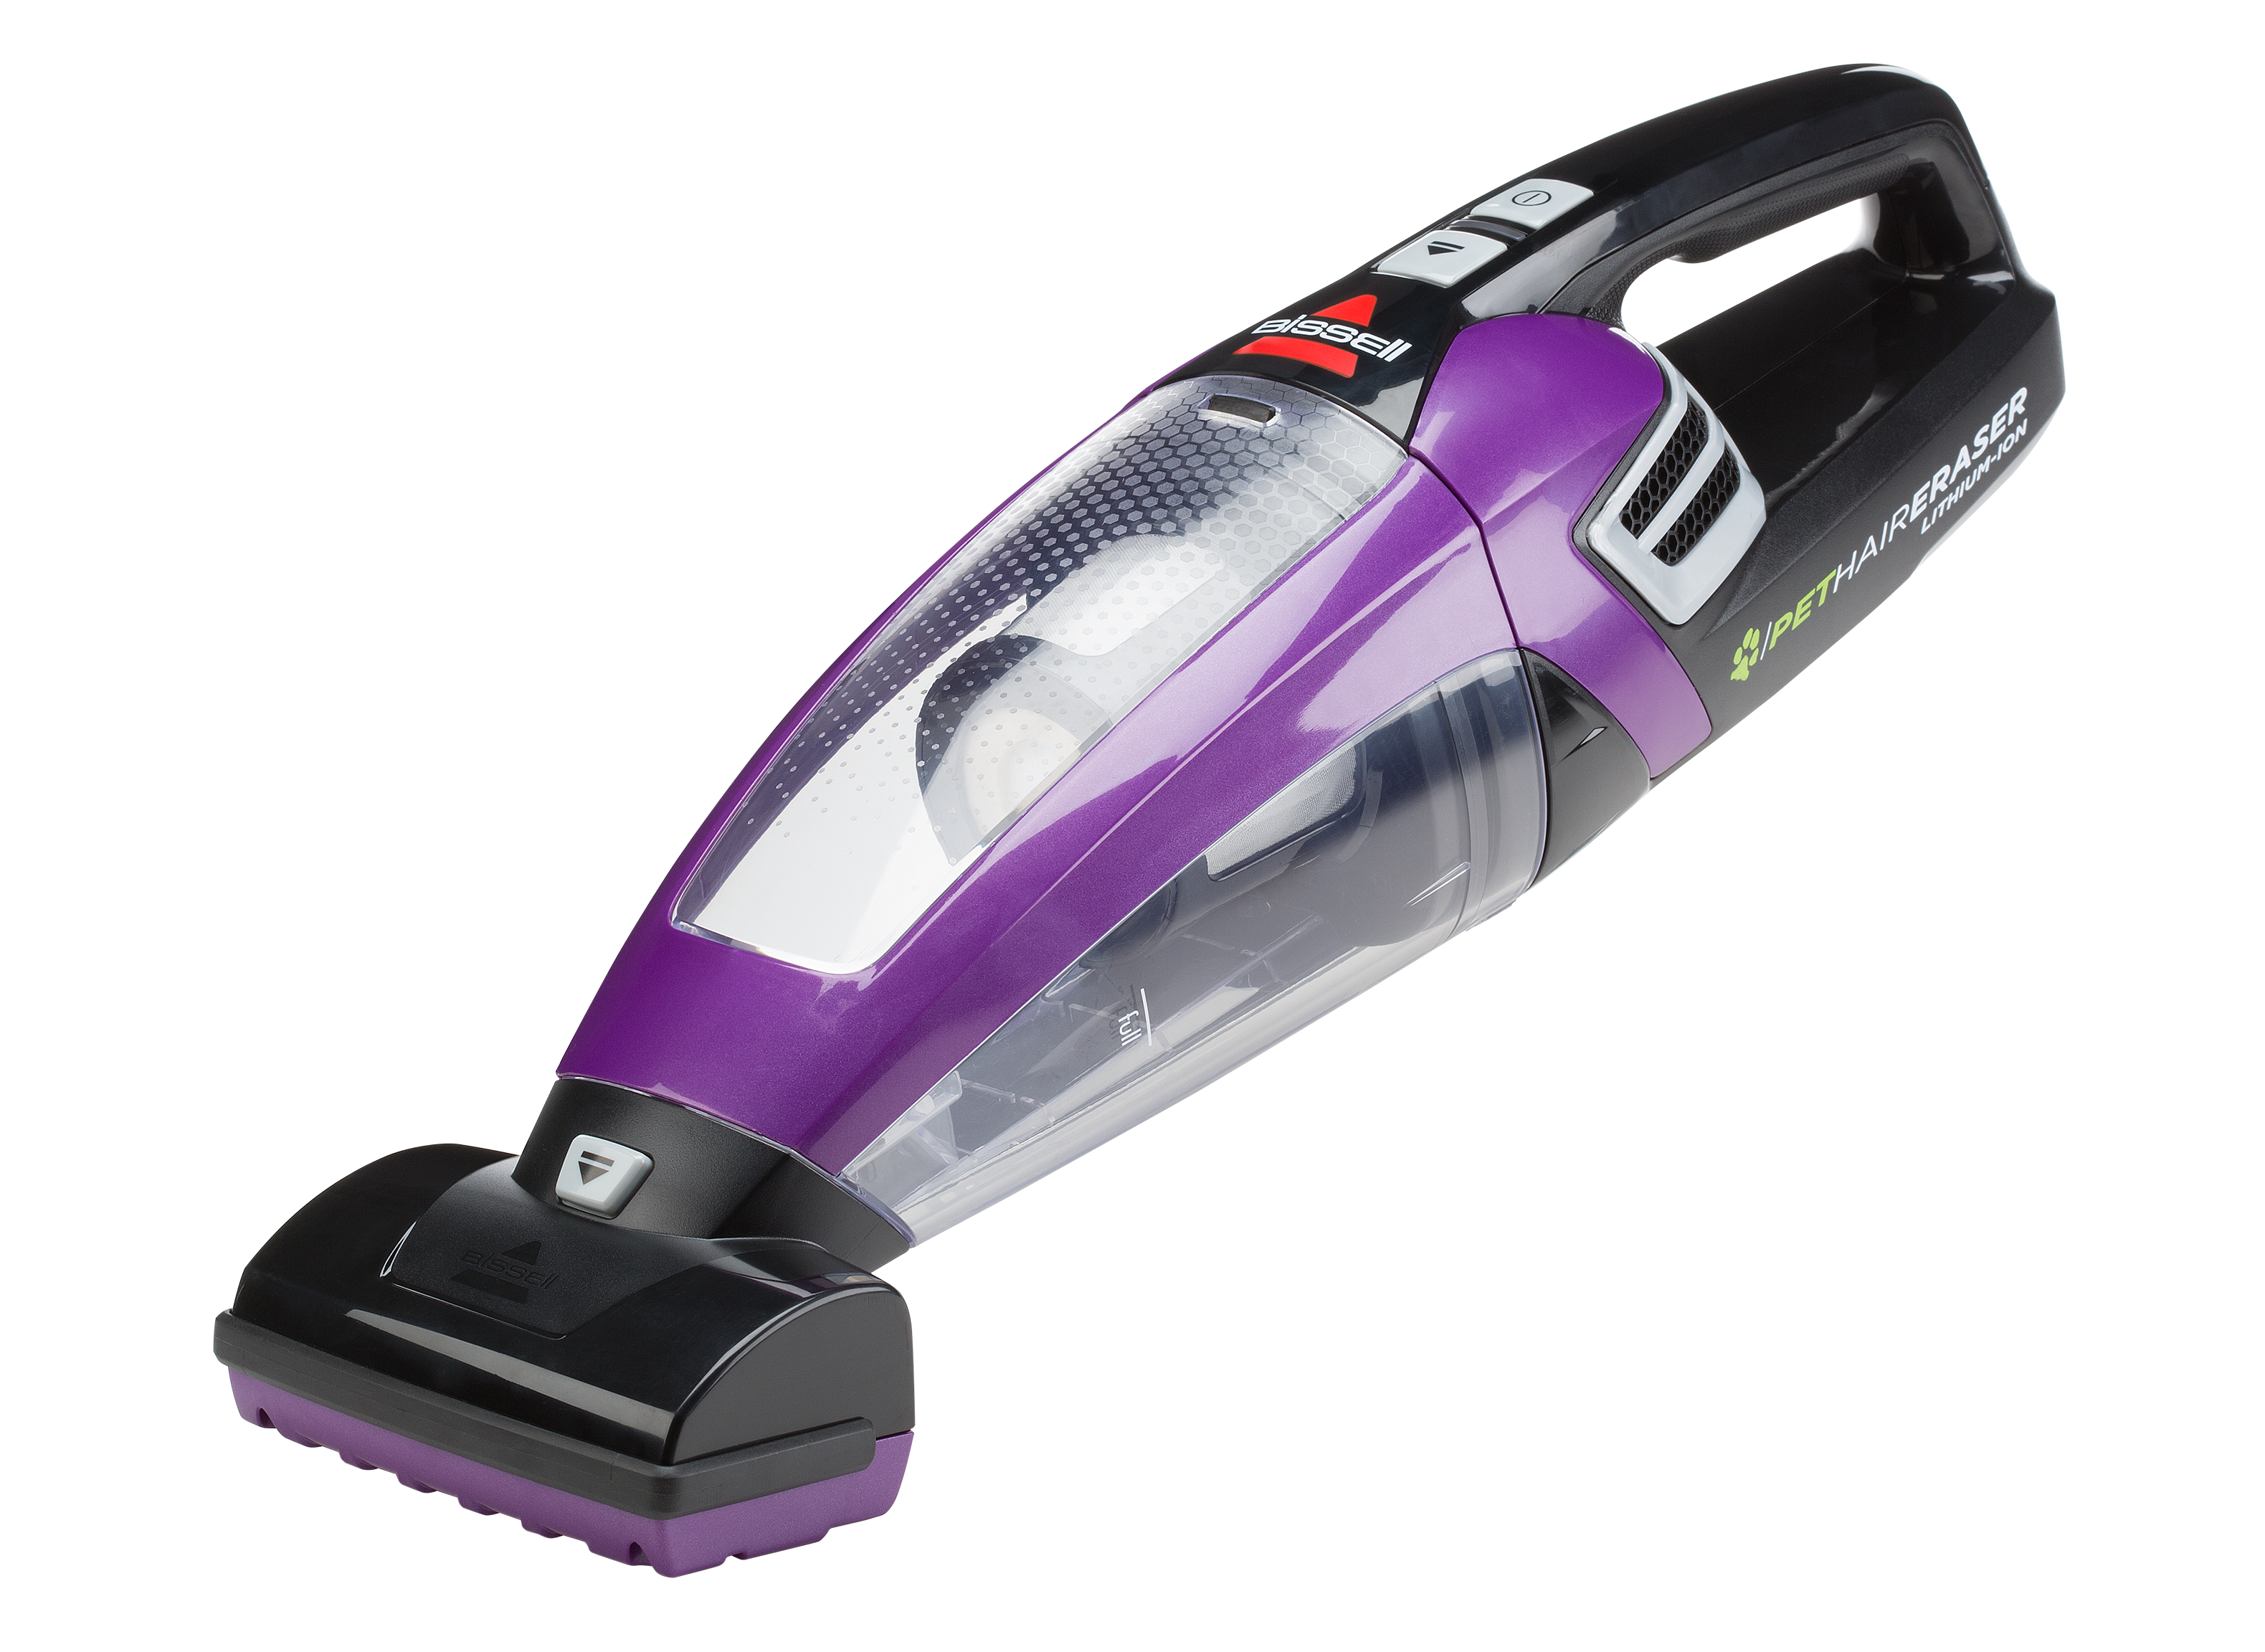 https://crdms.images.consumerreports.org/prod/products/cr/models/399490-handheld-vacuums-bissell-pet-hair-eraser-2390a-10007979.png